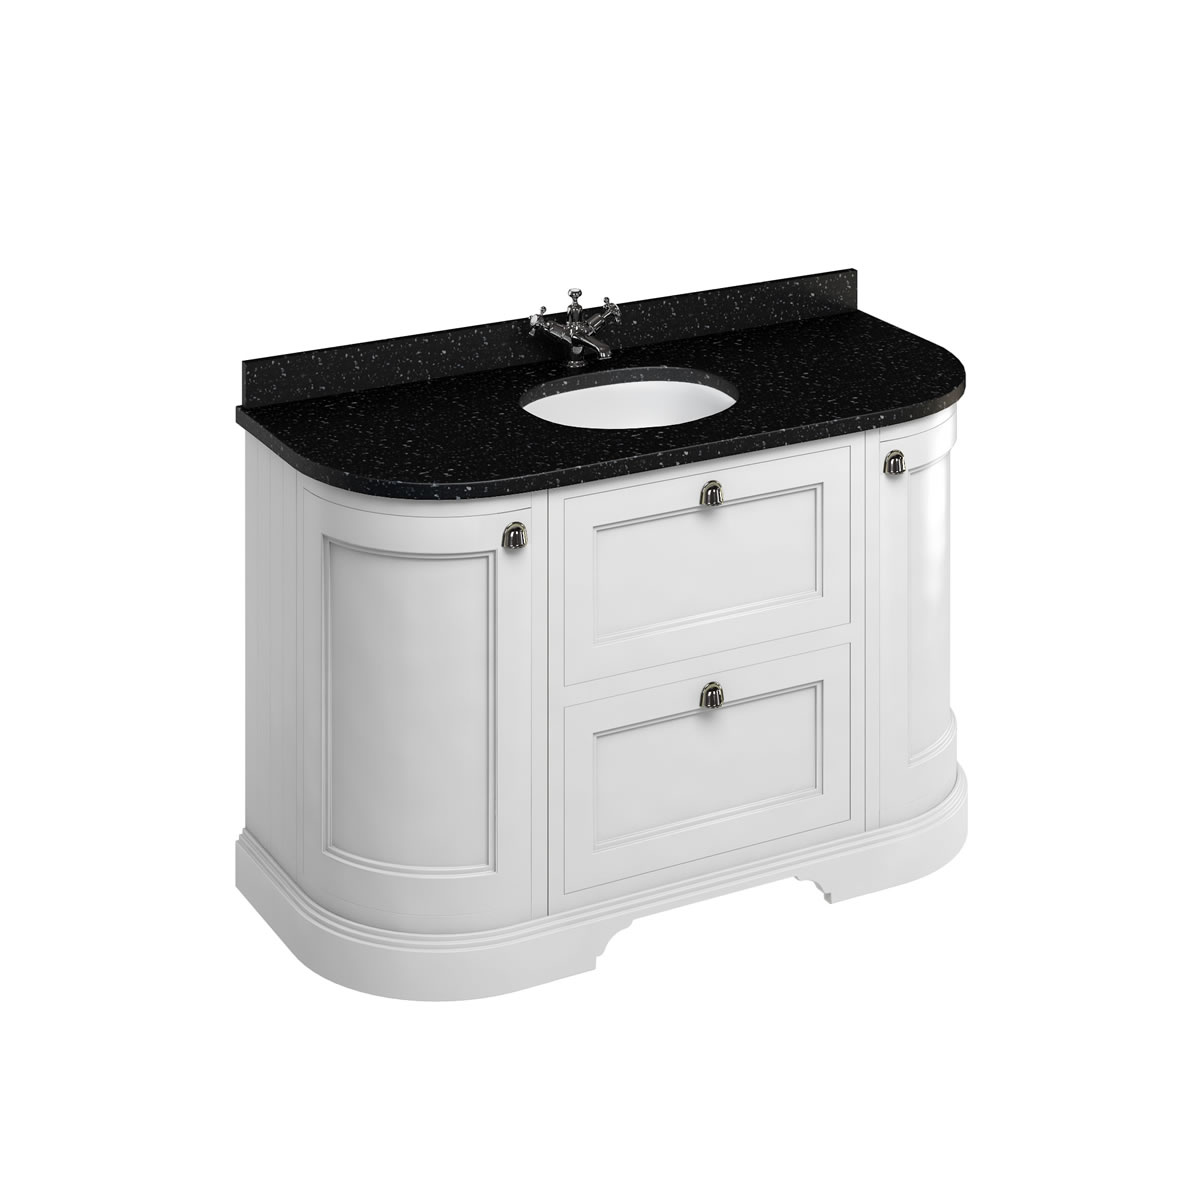 Freestanding 134 Curved Vanity Unit with drawers - Matt White and Minerva black granite worktop with integrated white basin